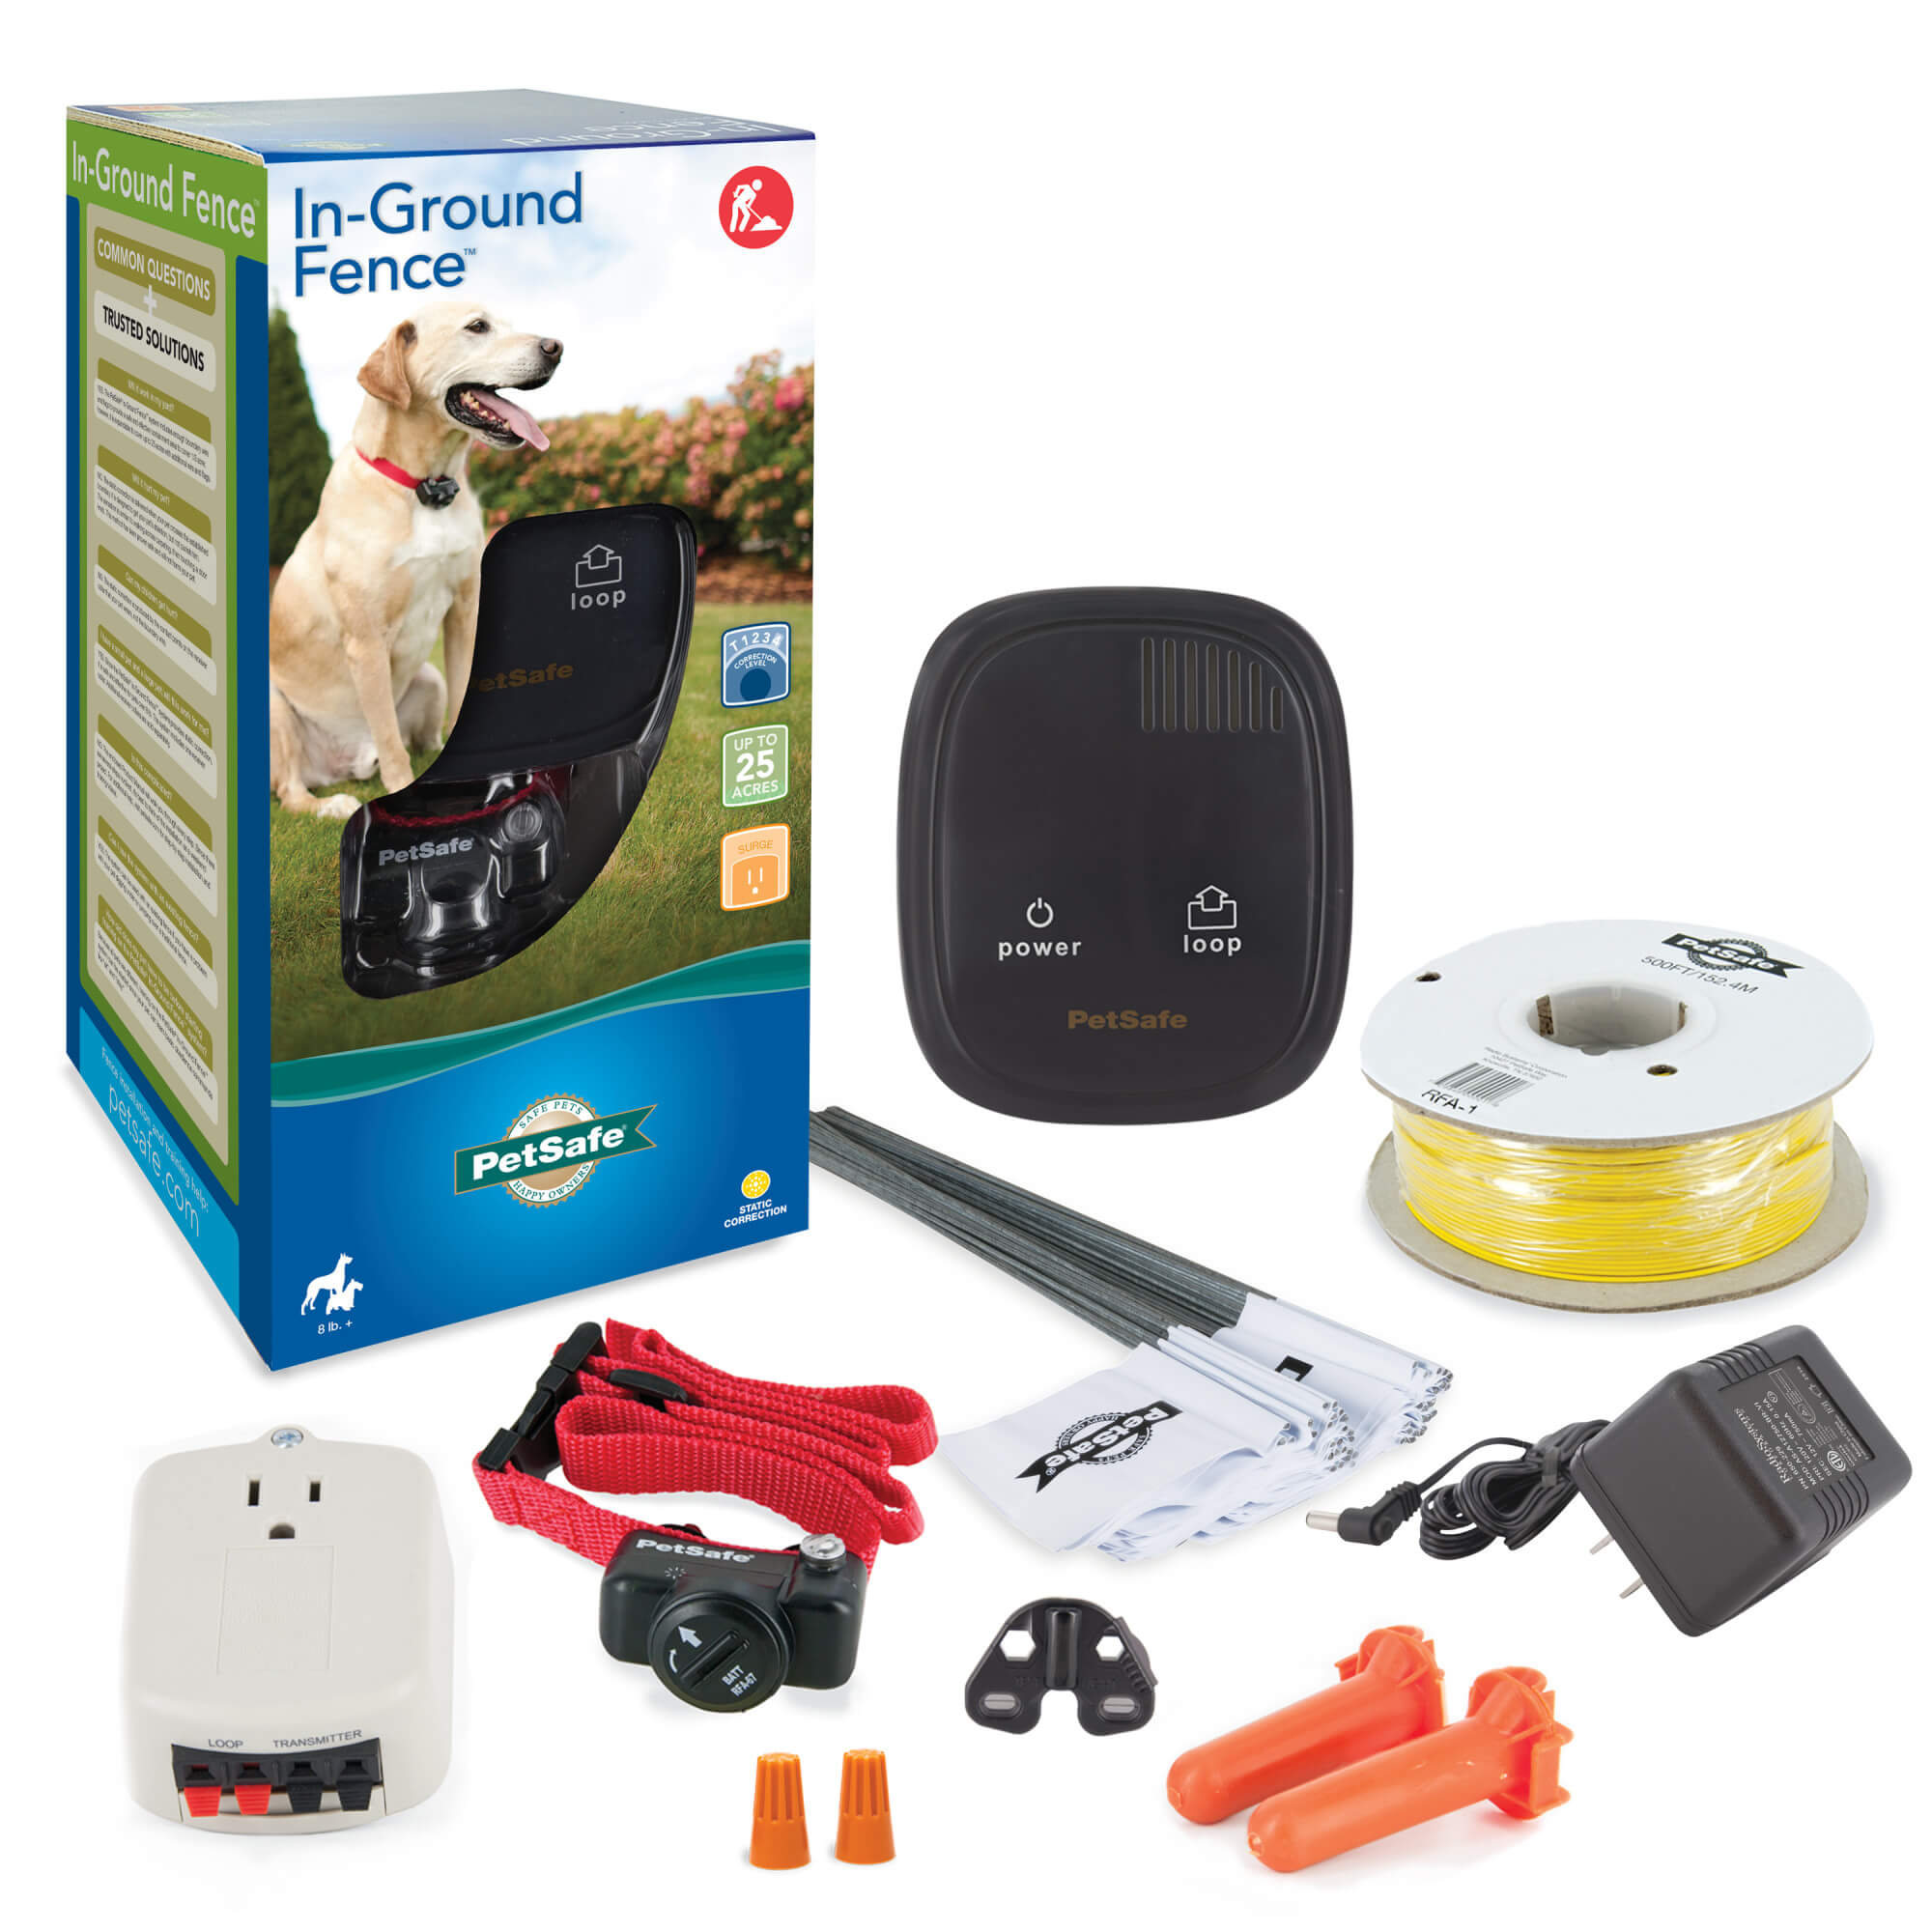 Petsafe in-ground fence and collar